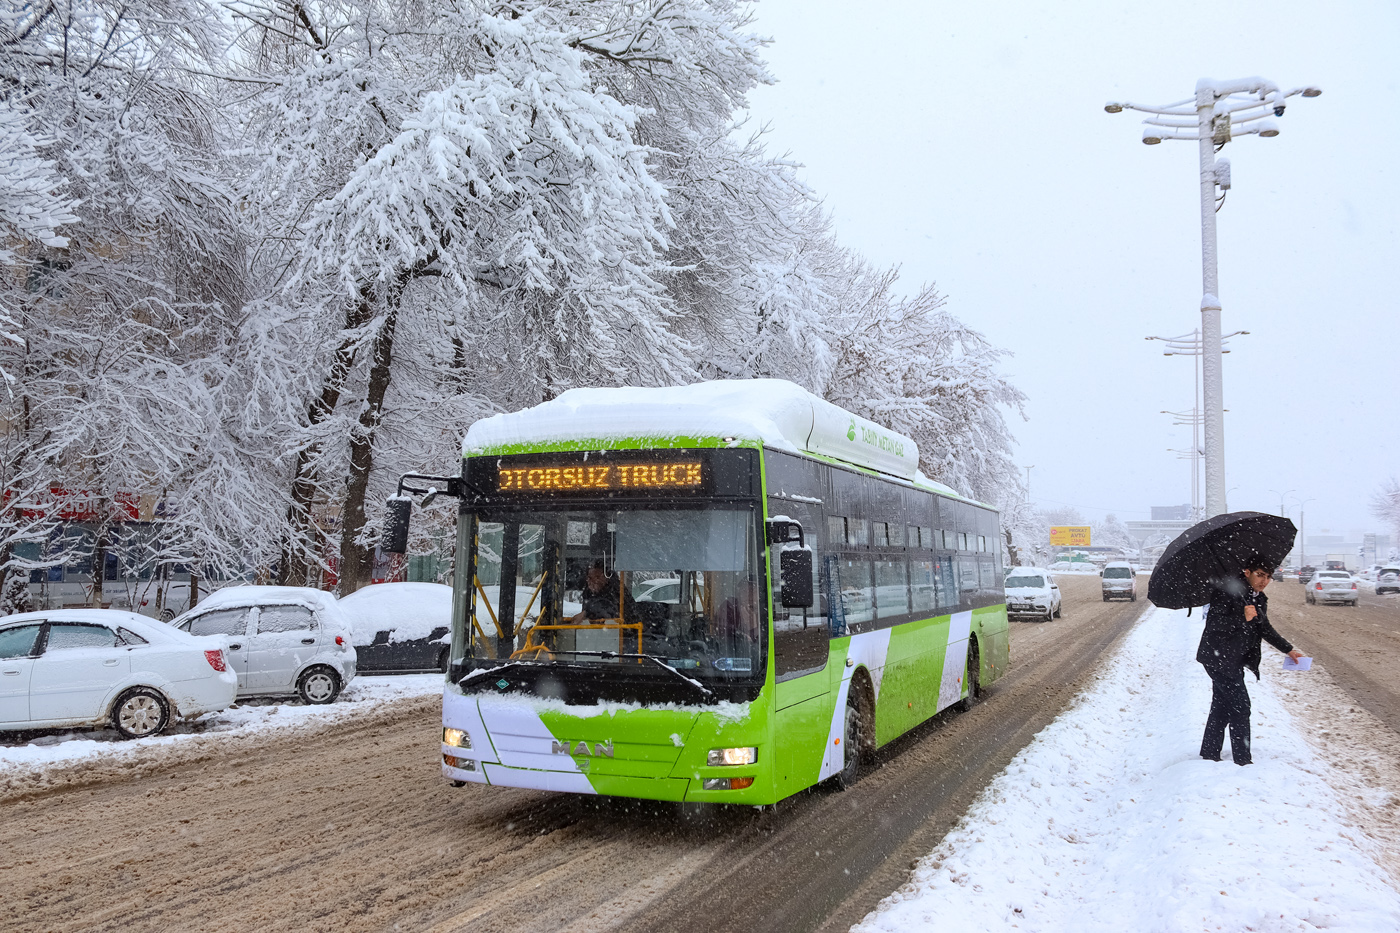 Tashkent — New buses without a number registration